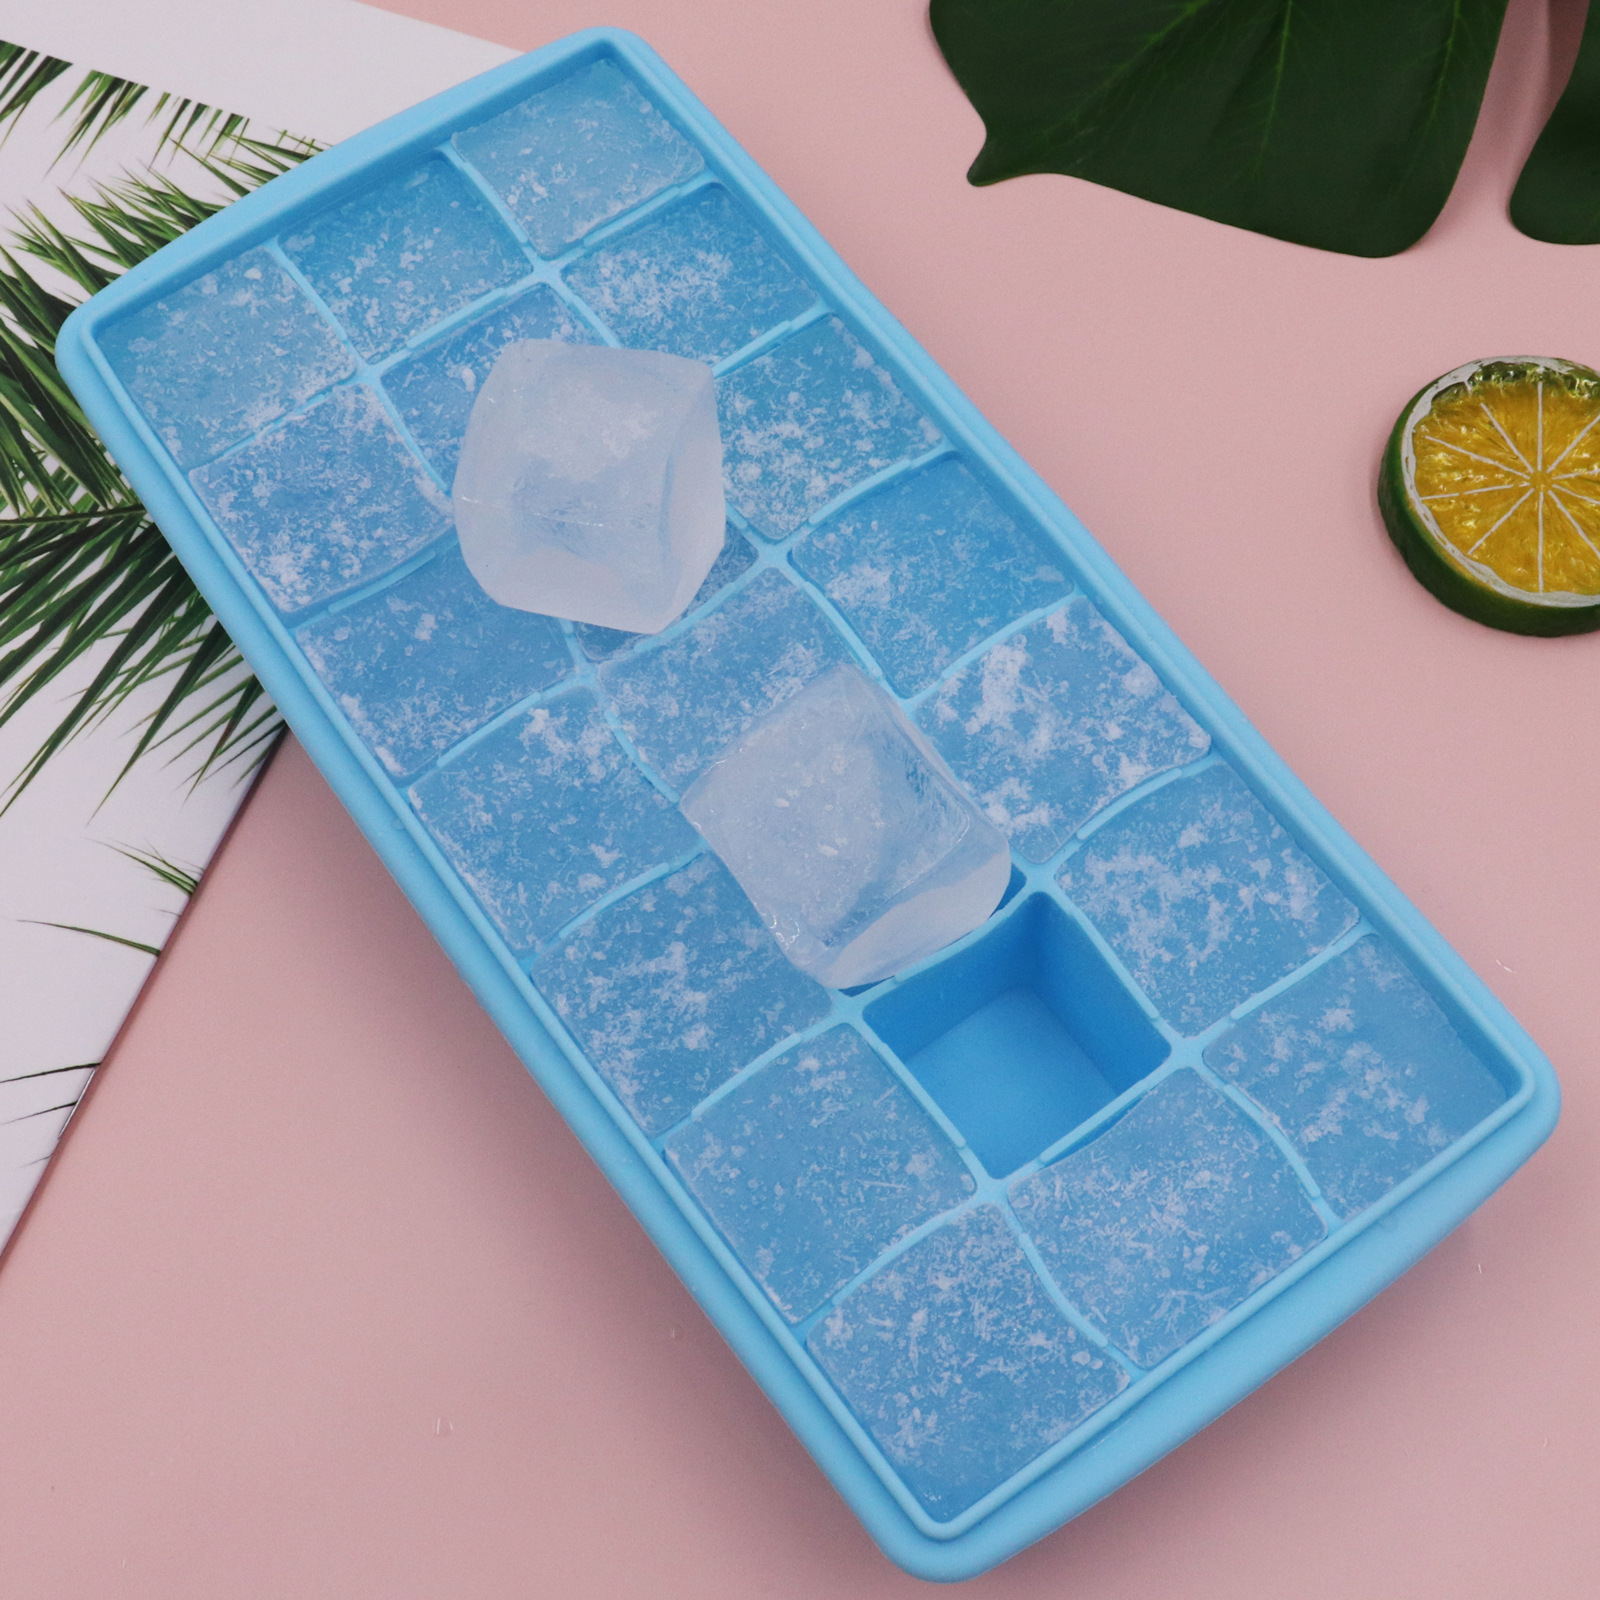 21 Holes Silicone Ice Cube Tray with Removable Lid